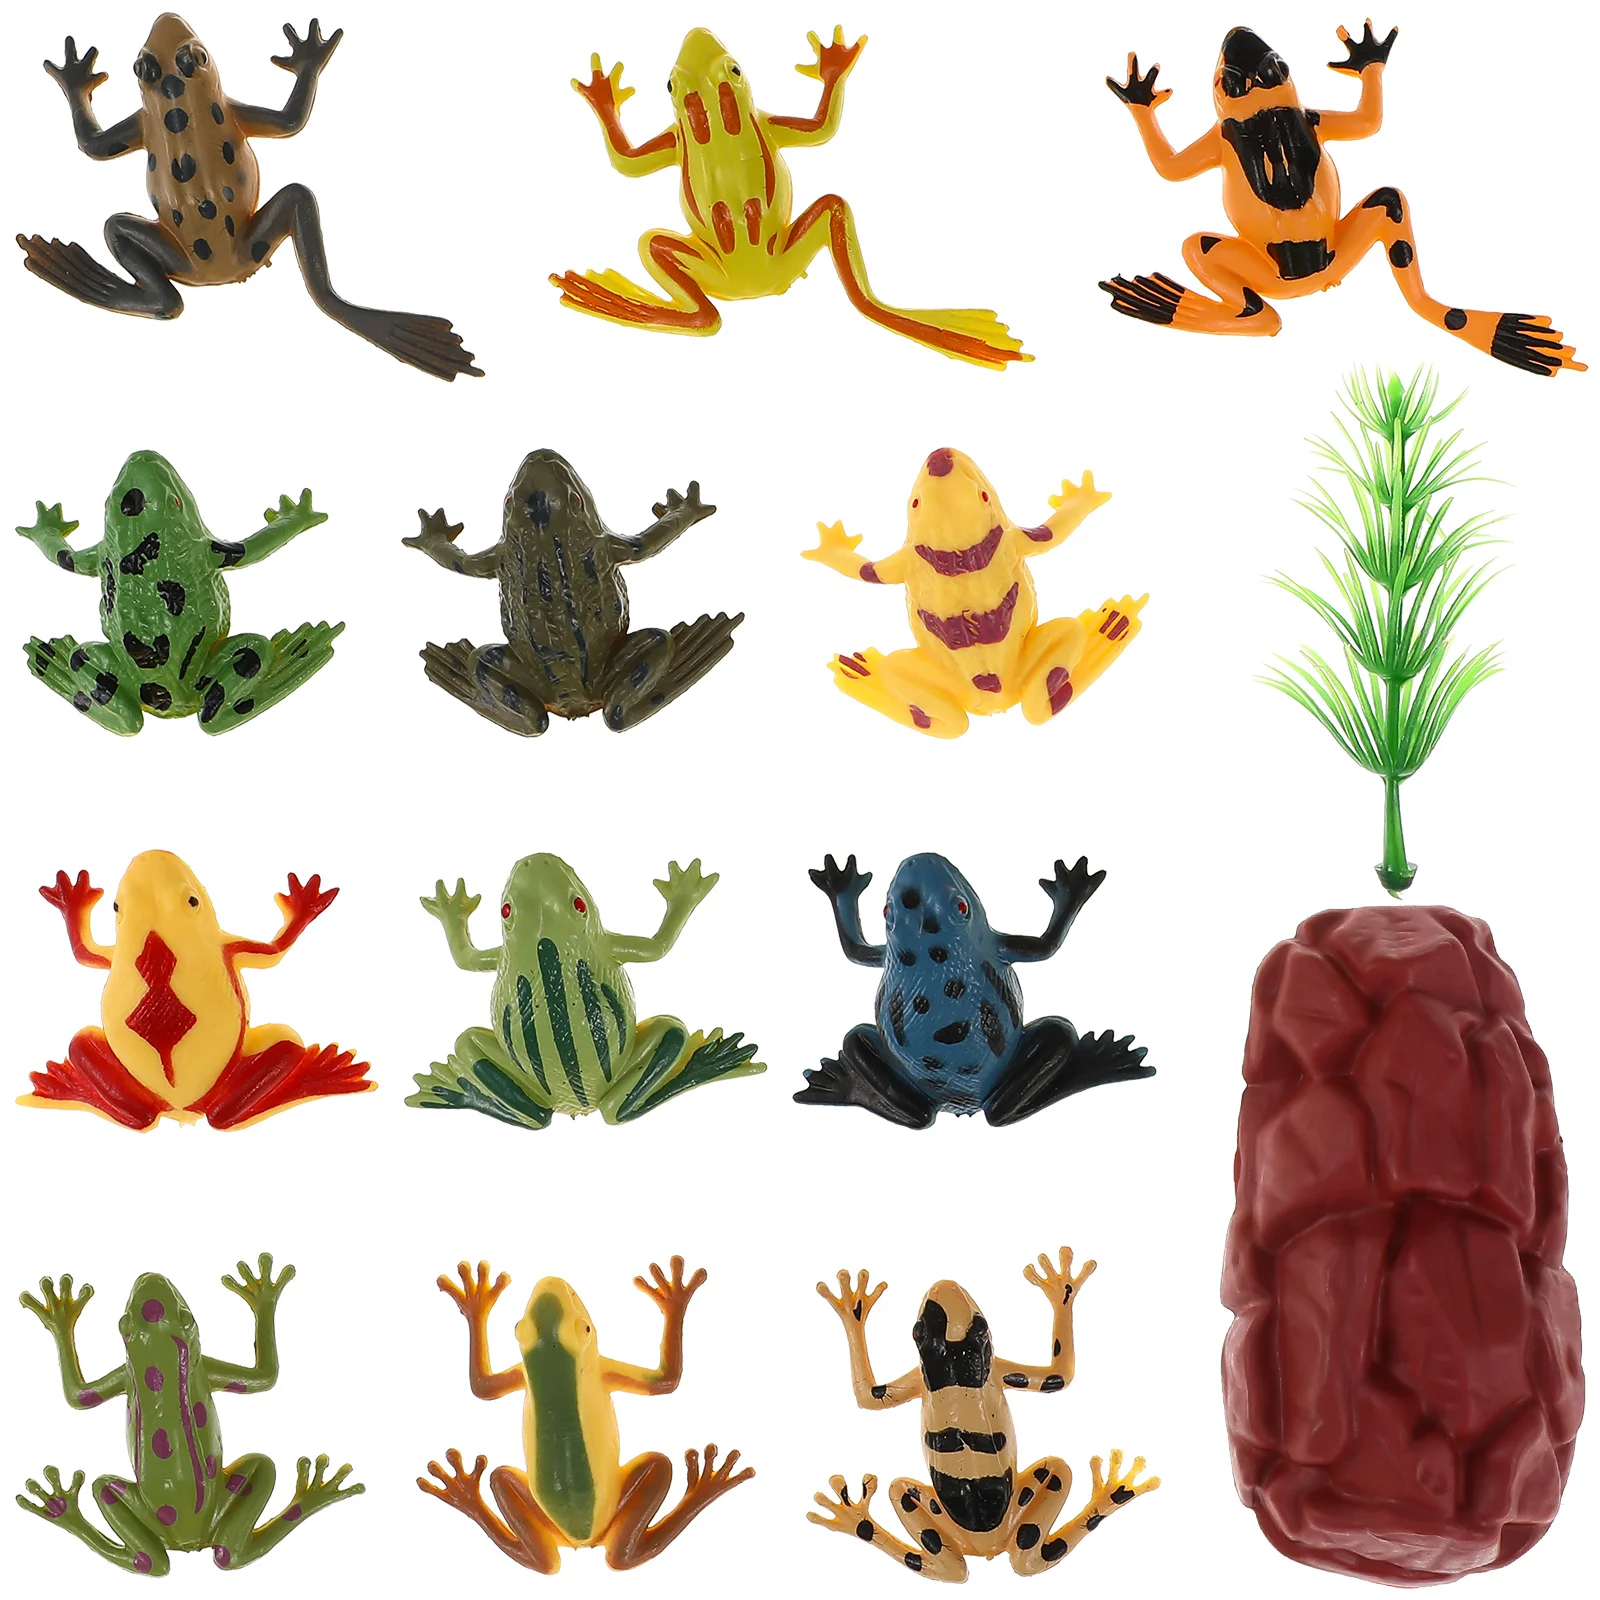 

Educational Toys Miniature Frogs Ornaments Tiny Statues Amphibious Child Figurines